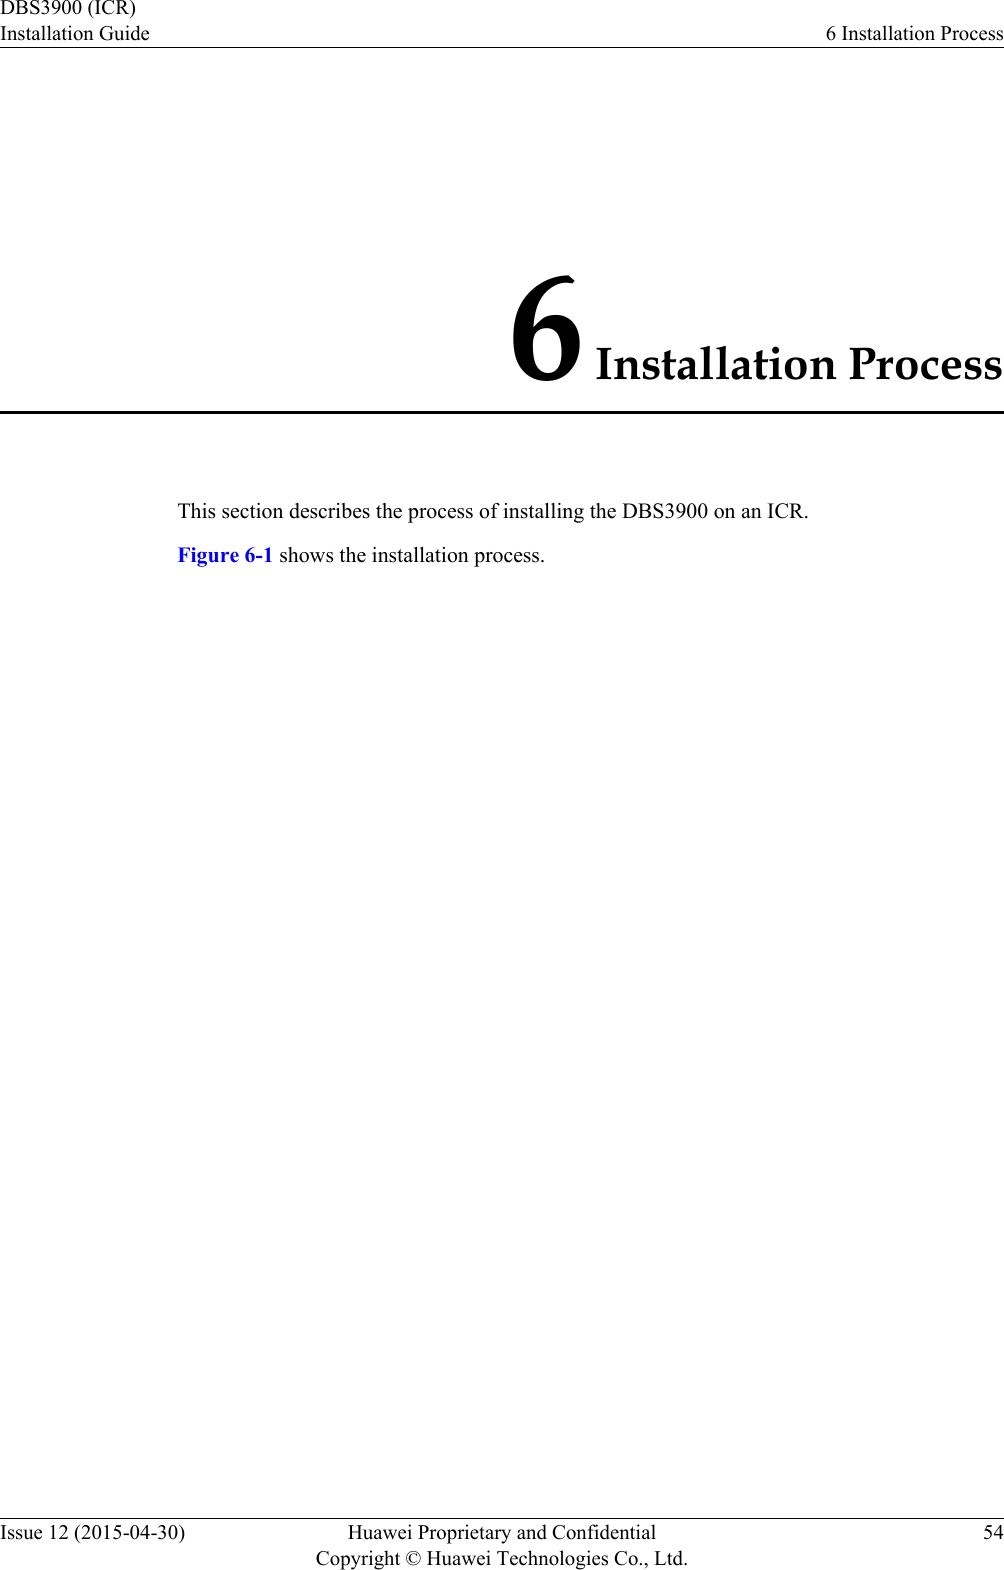 6 Installation ProcessThis section describes the process of installing the DBS3900 on an ICR.Figure 6-1 shows the installation process.DBS3900 (ICR)Installation Guide 6 Installation ProcessIssue 12 (2015-04-30) Huawei Proprietary and ConfidentialCopyright © Huawei Technologies Co., Ltd.54